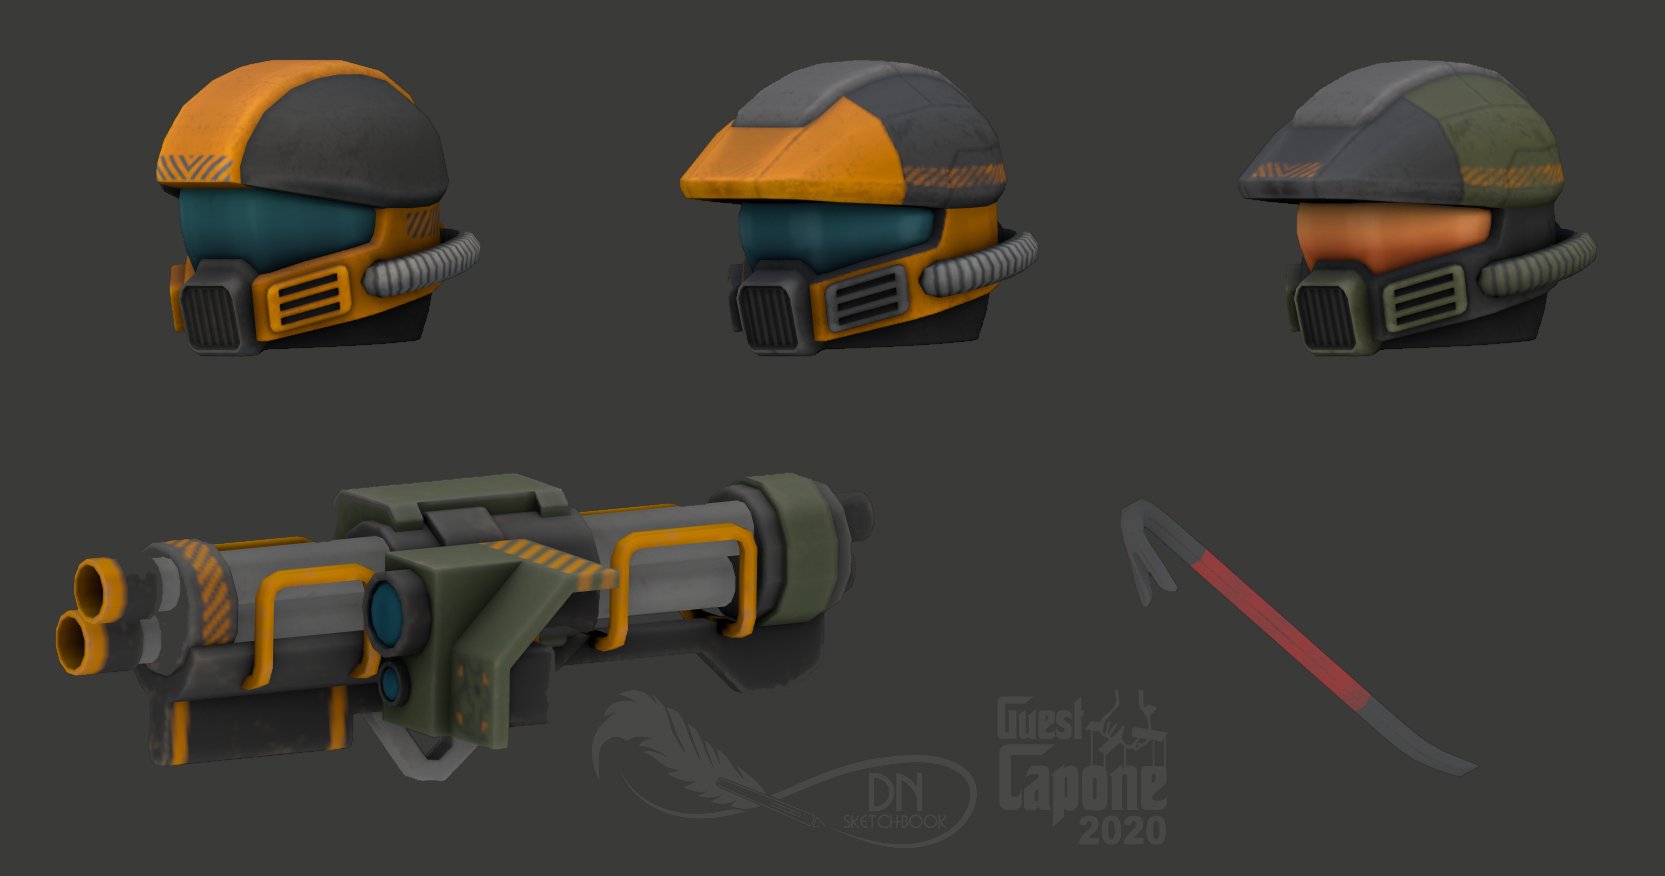 Guest Capone On Twitter Robloxdev Robloxugc Roblox Ugc Epic Items On The Catalog 4 This Week Crowbar Https T Co Zaow5mmitg Rad Suppress Helmet Https T Co 0xb5xtrzzm Hod Helmet Https T Co Gmy2q8ydzq Juggernaut Helmet Https T Co - halo helmet roblox